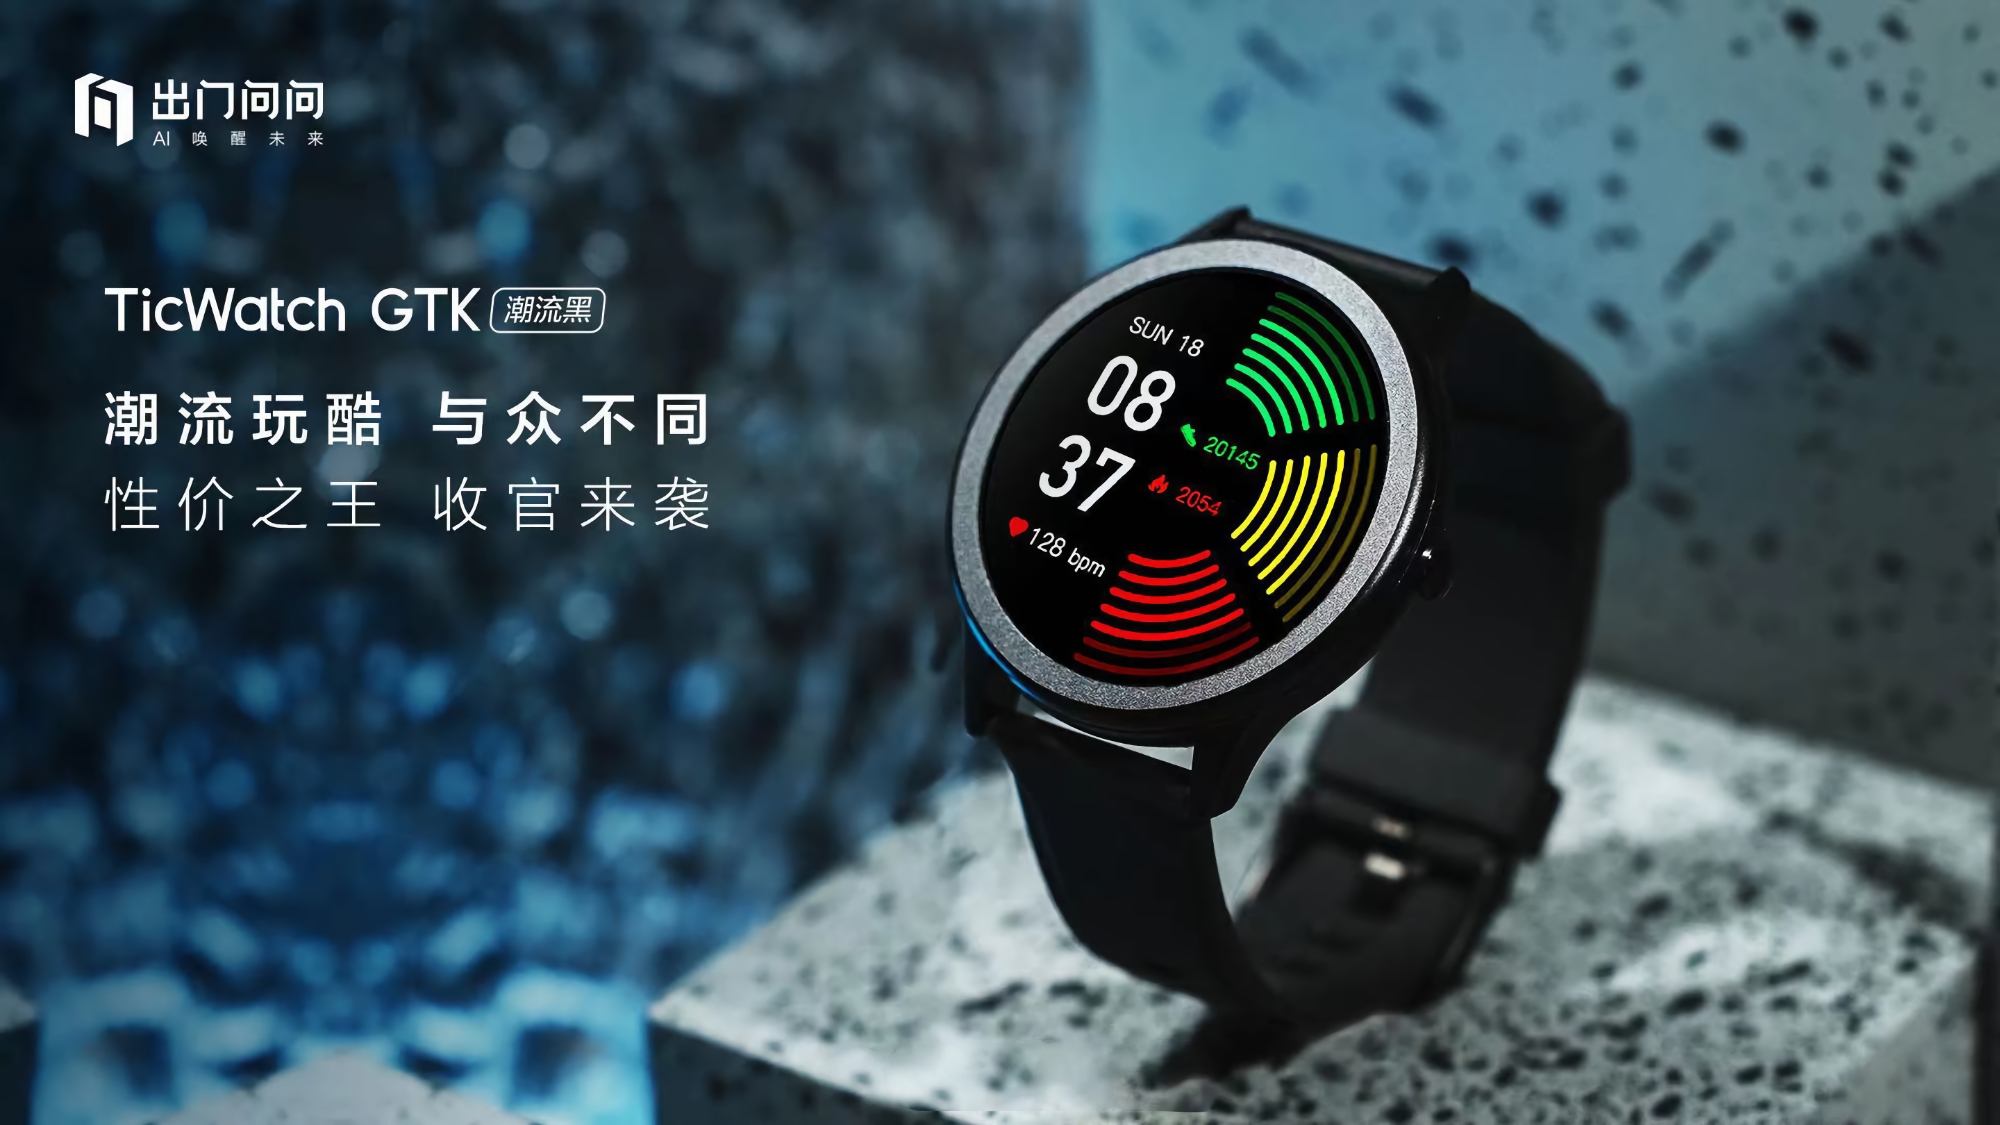 TicWatch GTK: 1.3-inch display, water resistant, 14 sport modes and autonomy up to 10 days for $ 30